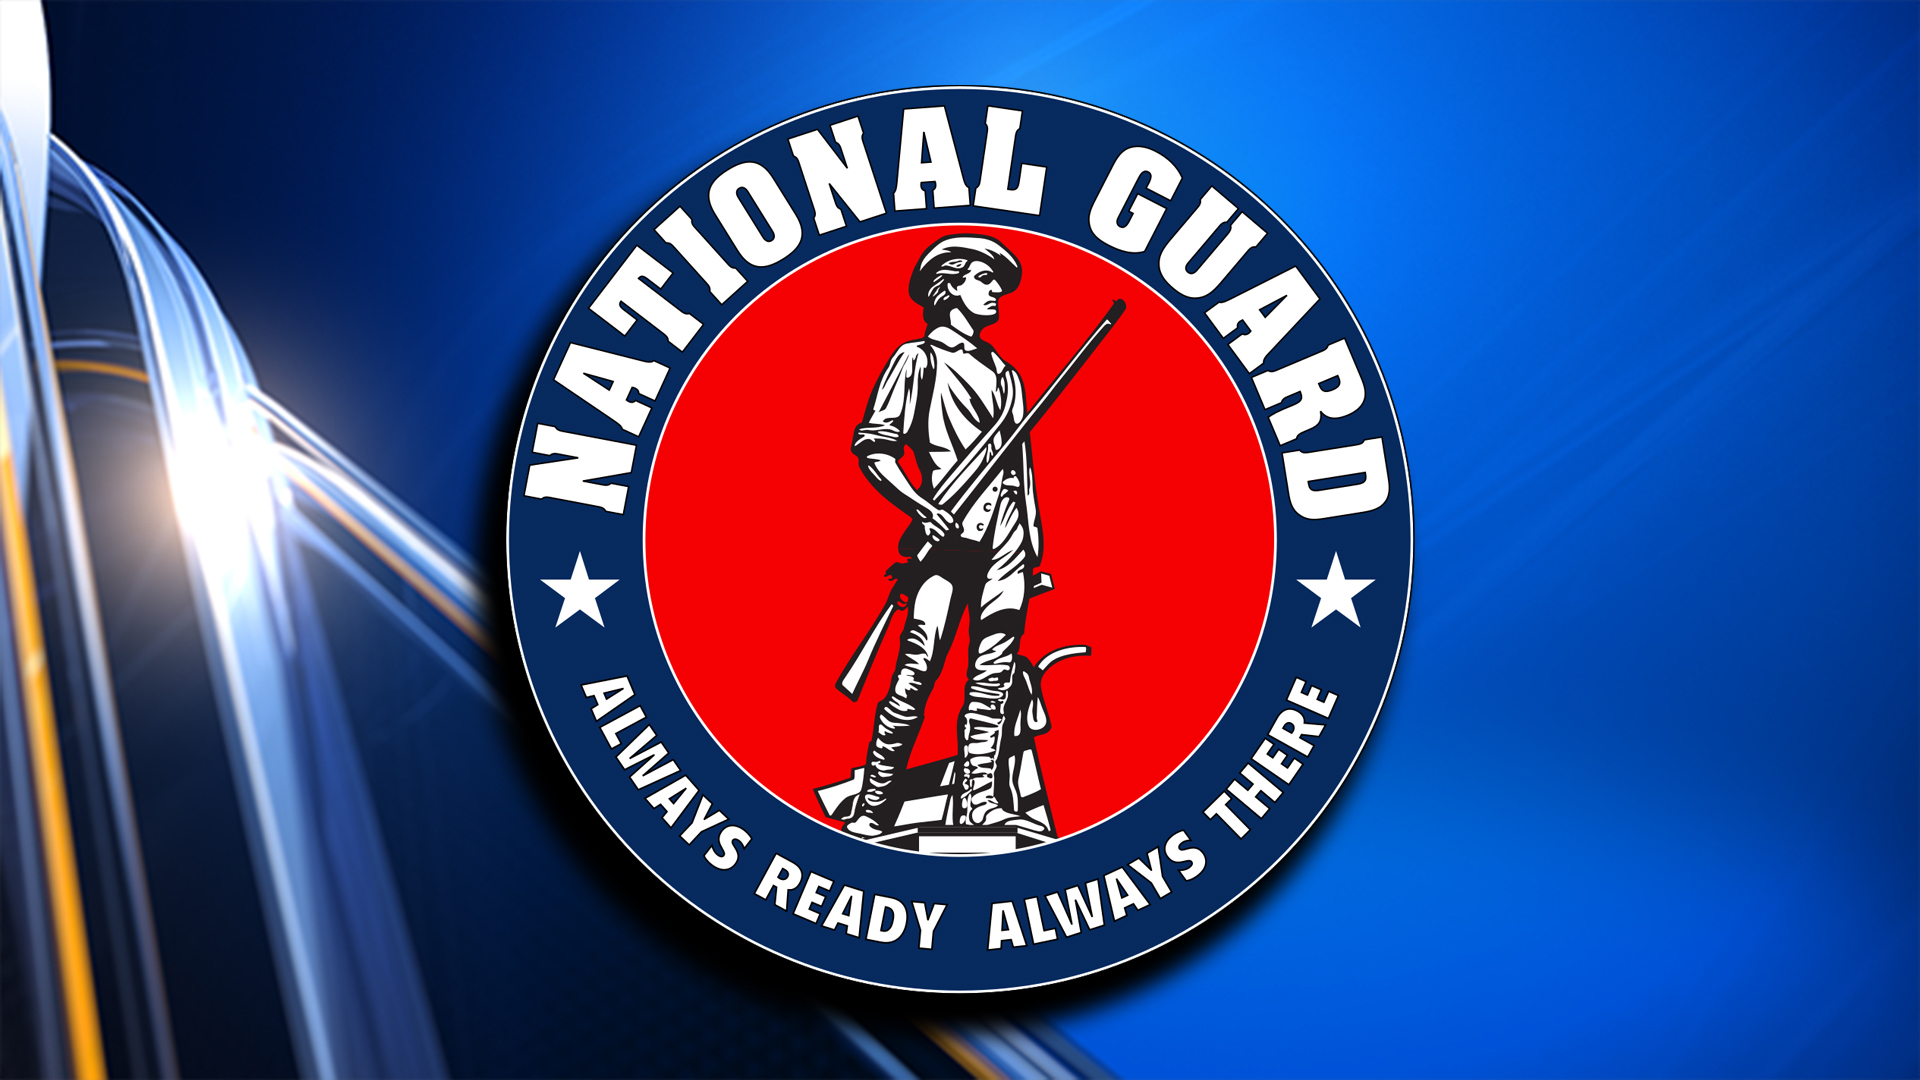 kicked out of National Guard over white supremacist ties